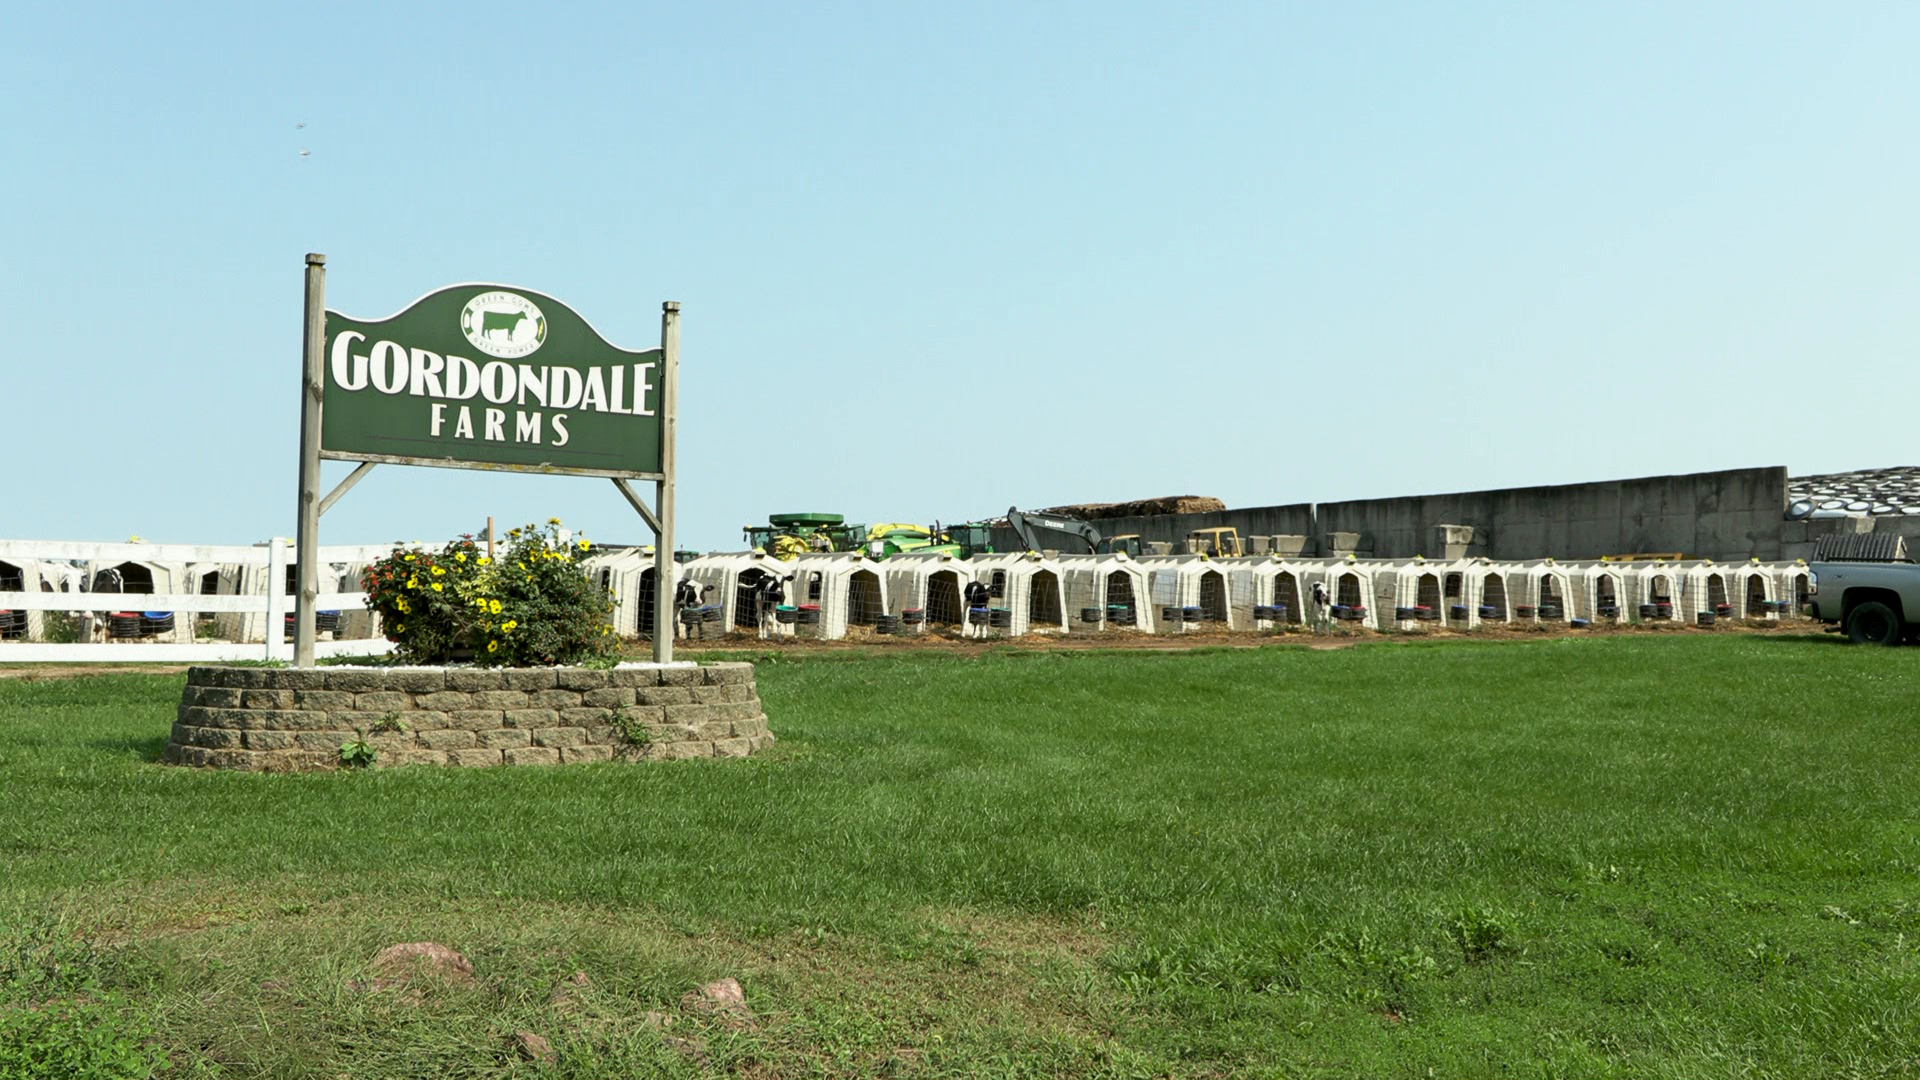 A sign reading Gordondale Farms is mounted in a masonry base and stands in front of a row of calf hutches, with a building and vehicles in the background.